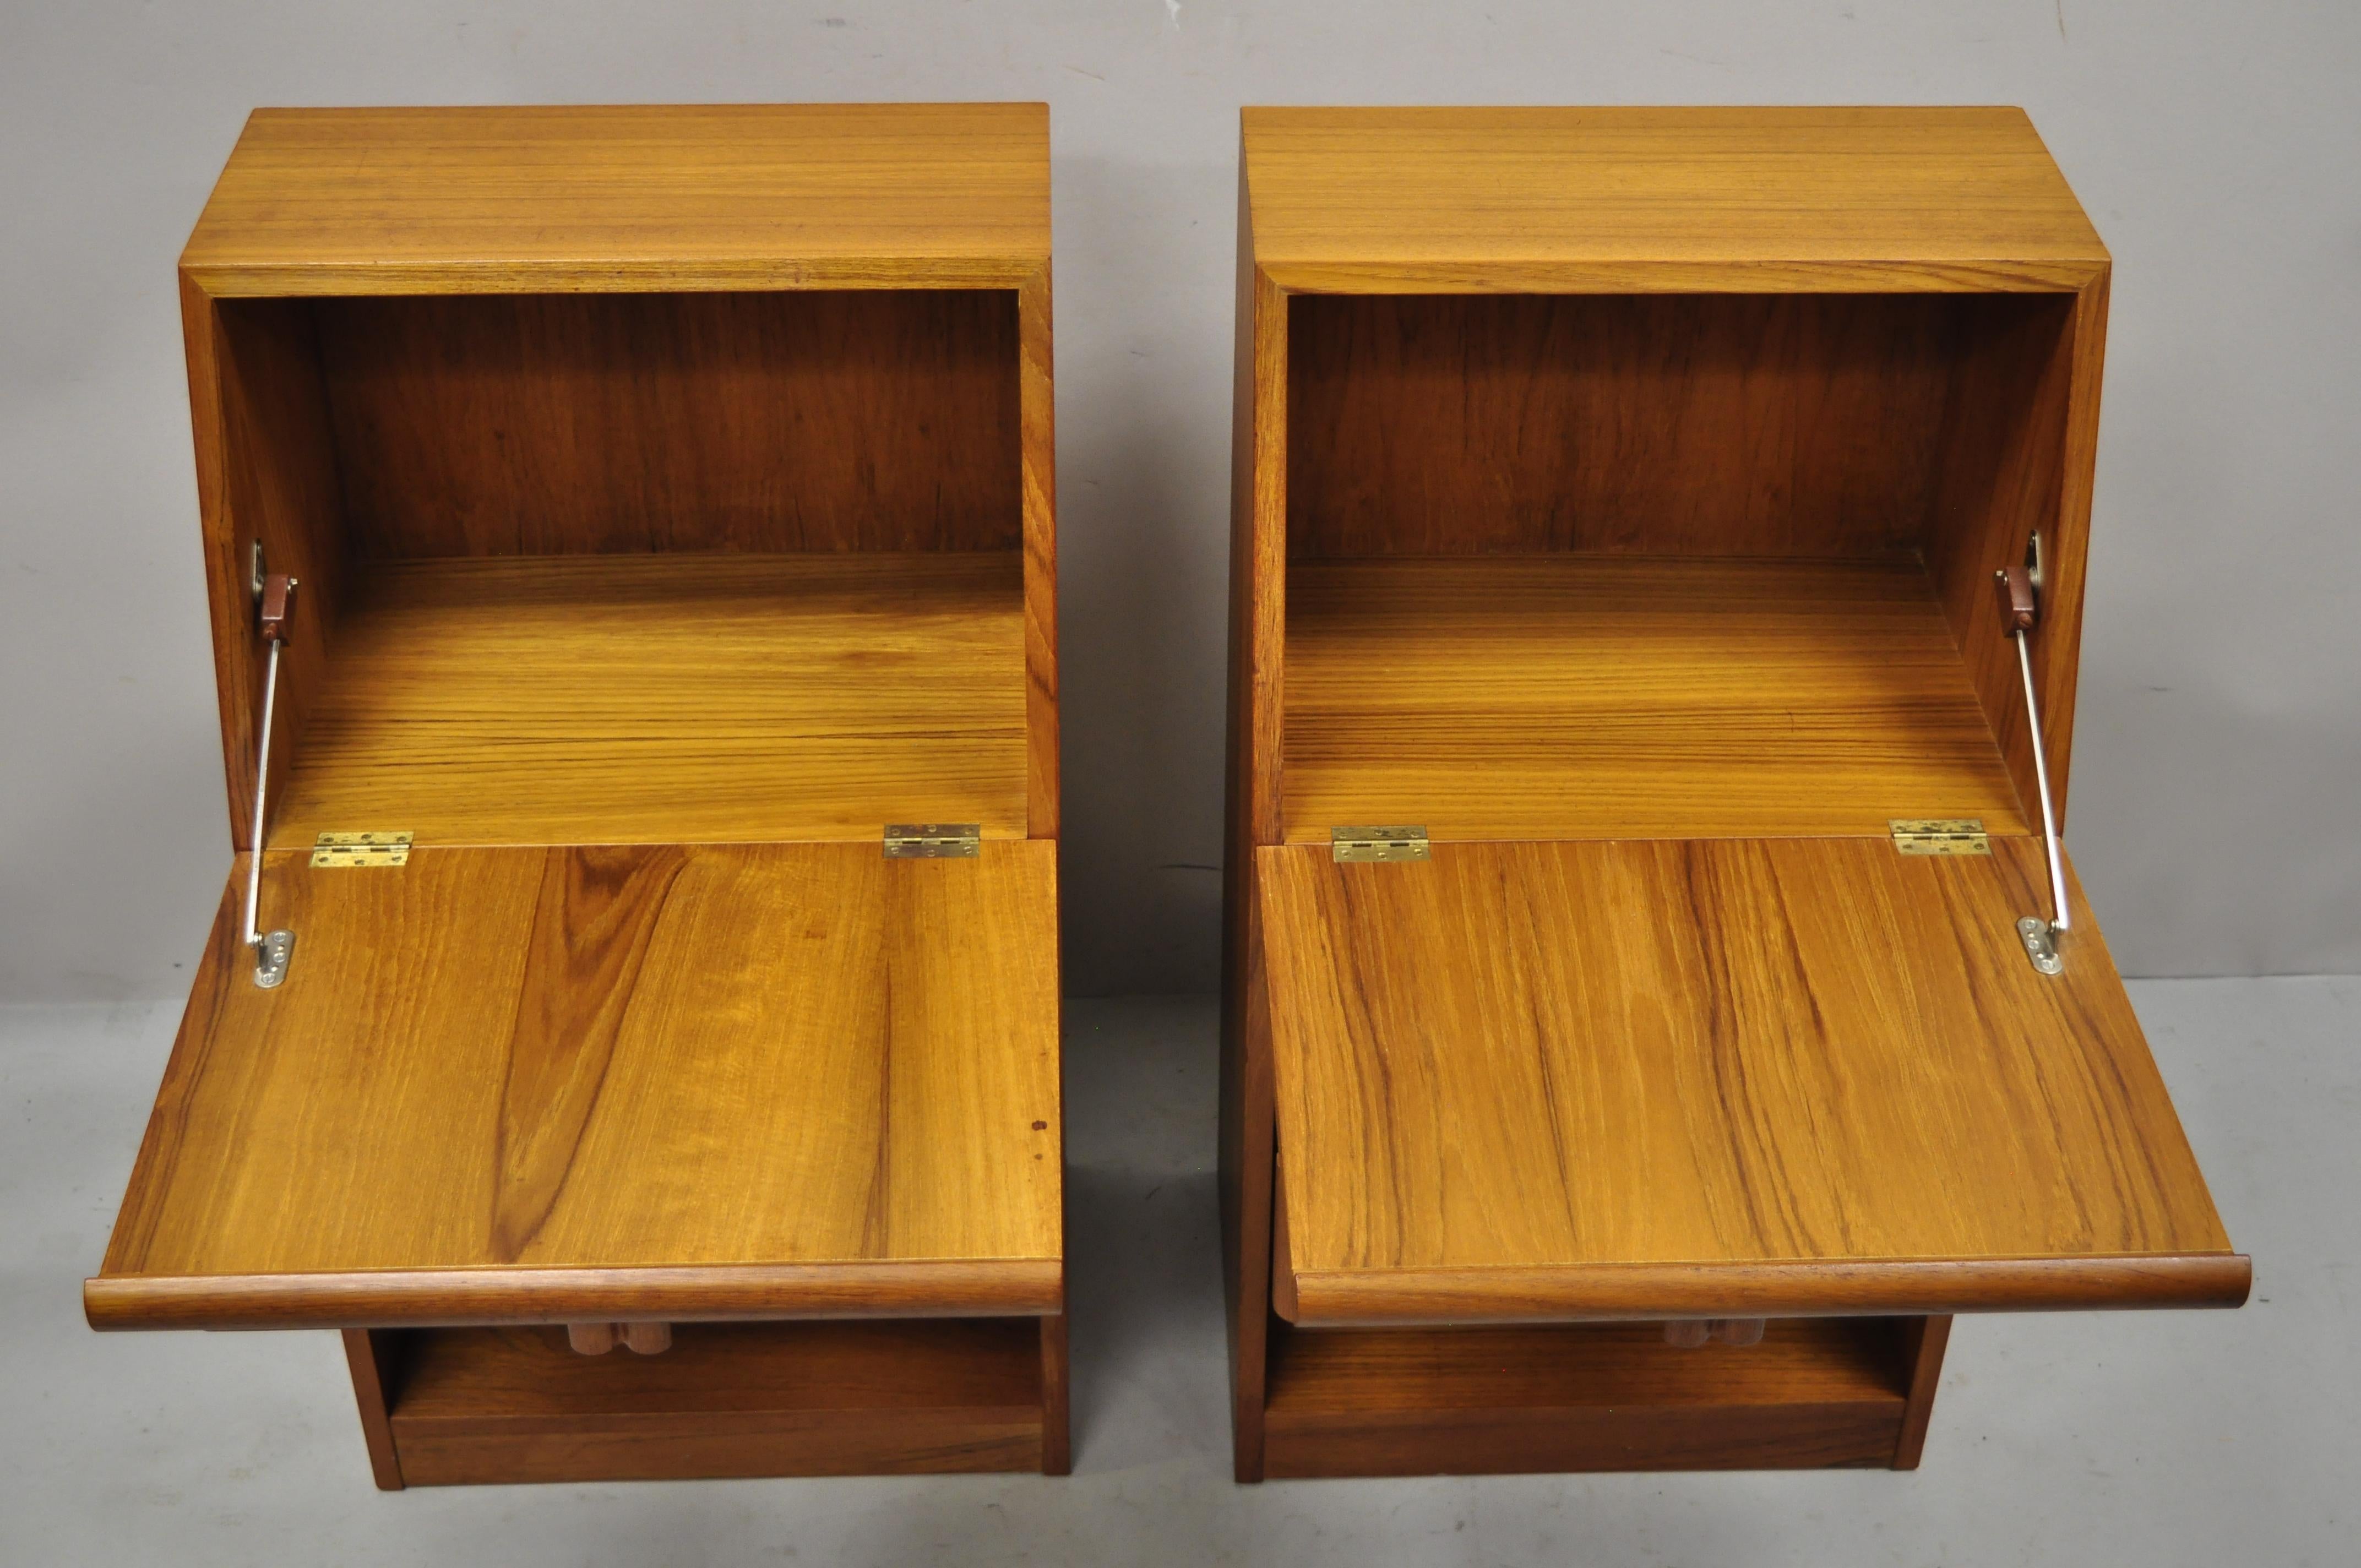 Vintage Mid Century Danish Modern Teak Bedside Cabinet Nightstands, a Pair In Good Condition For Sale In Philadelphia, PA